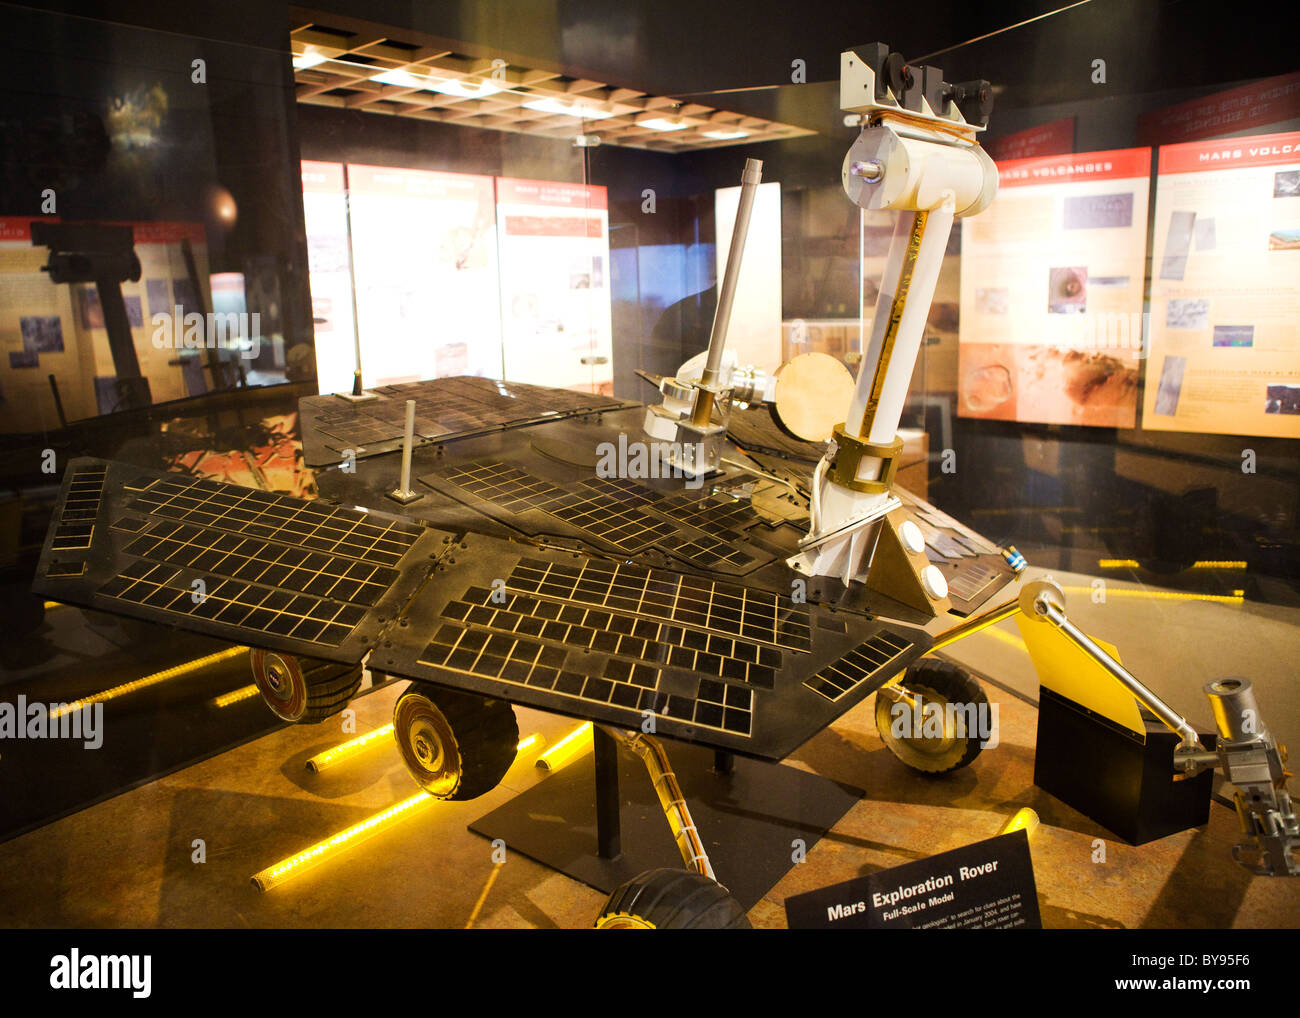 Full-Scale Modell des Mars Exploration Rover im Smithsonian angezeigt Stockfoto